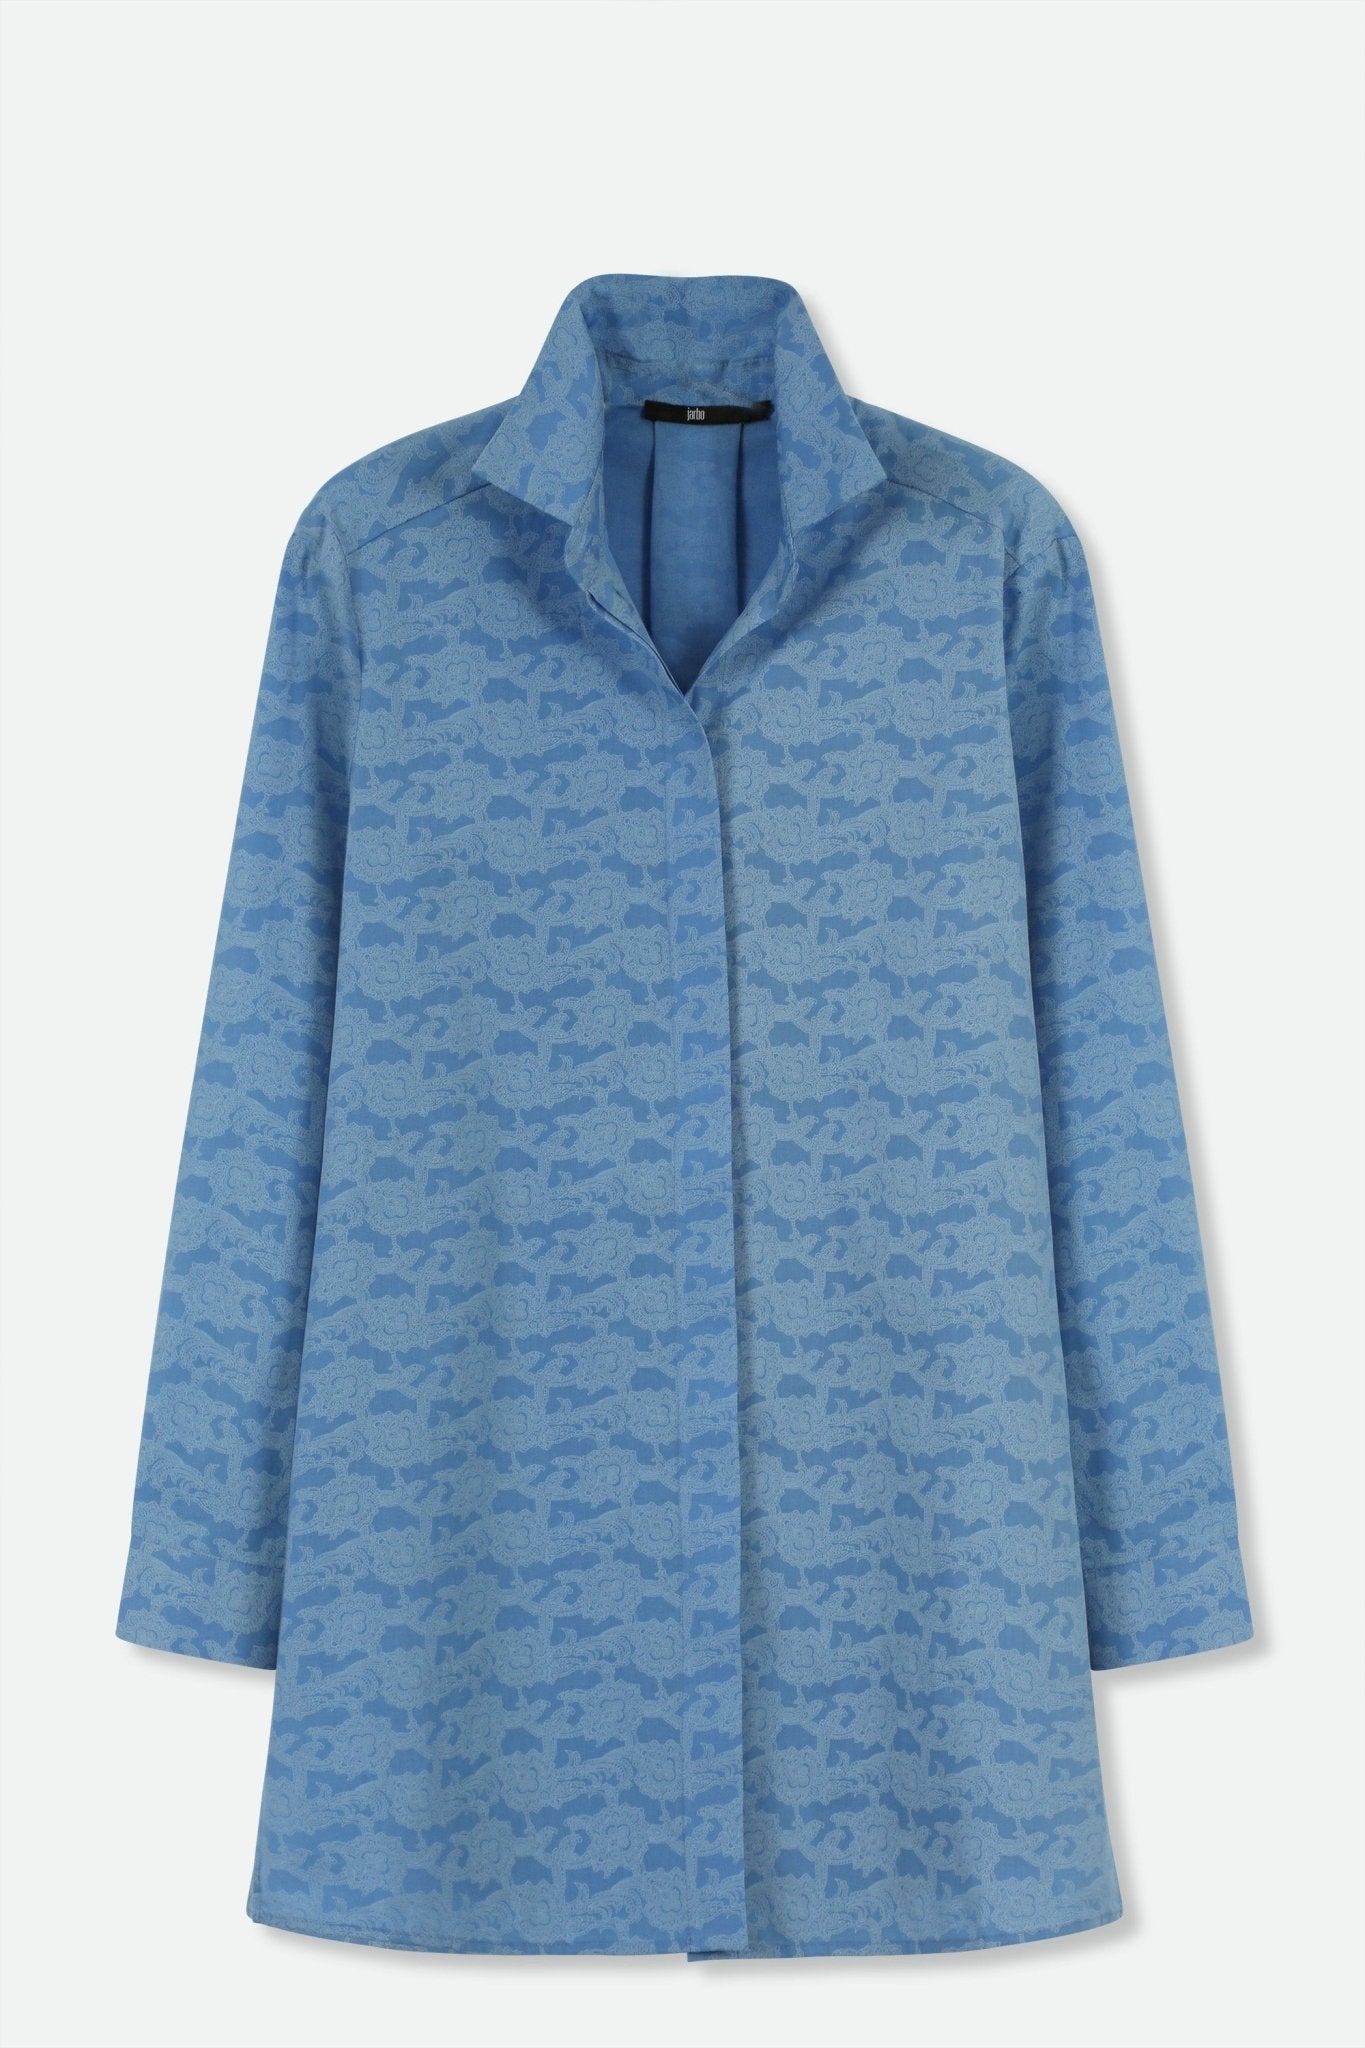 SELLA ITALIAN COTTON SHIRT IN SKY PAINTING BLUE - Jarbo